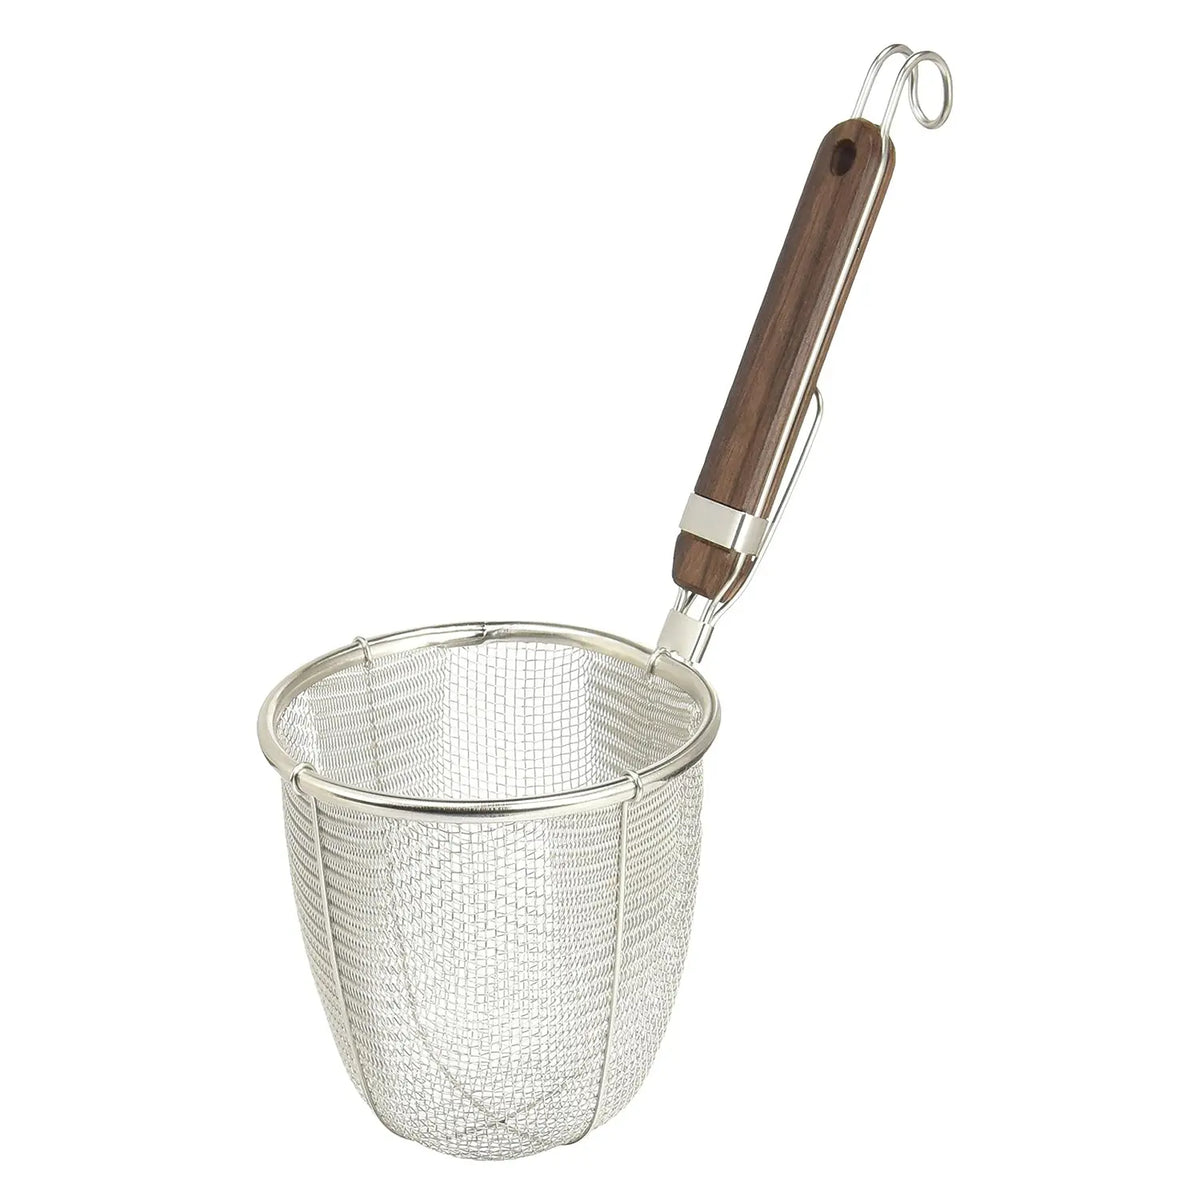 Three Snow Stainless Steel Udon Tebo Noodle Strainer with Wooden Handle